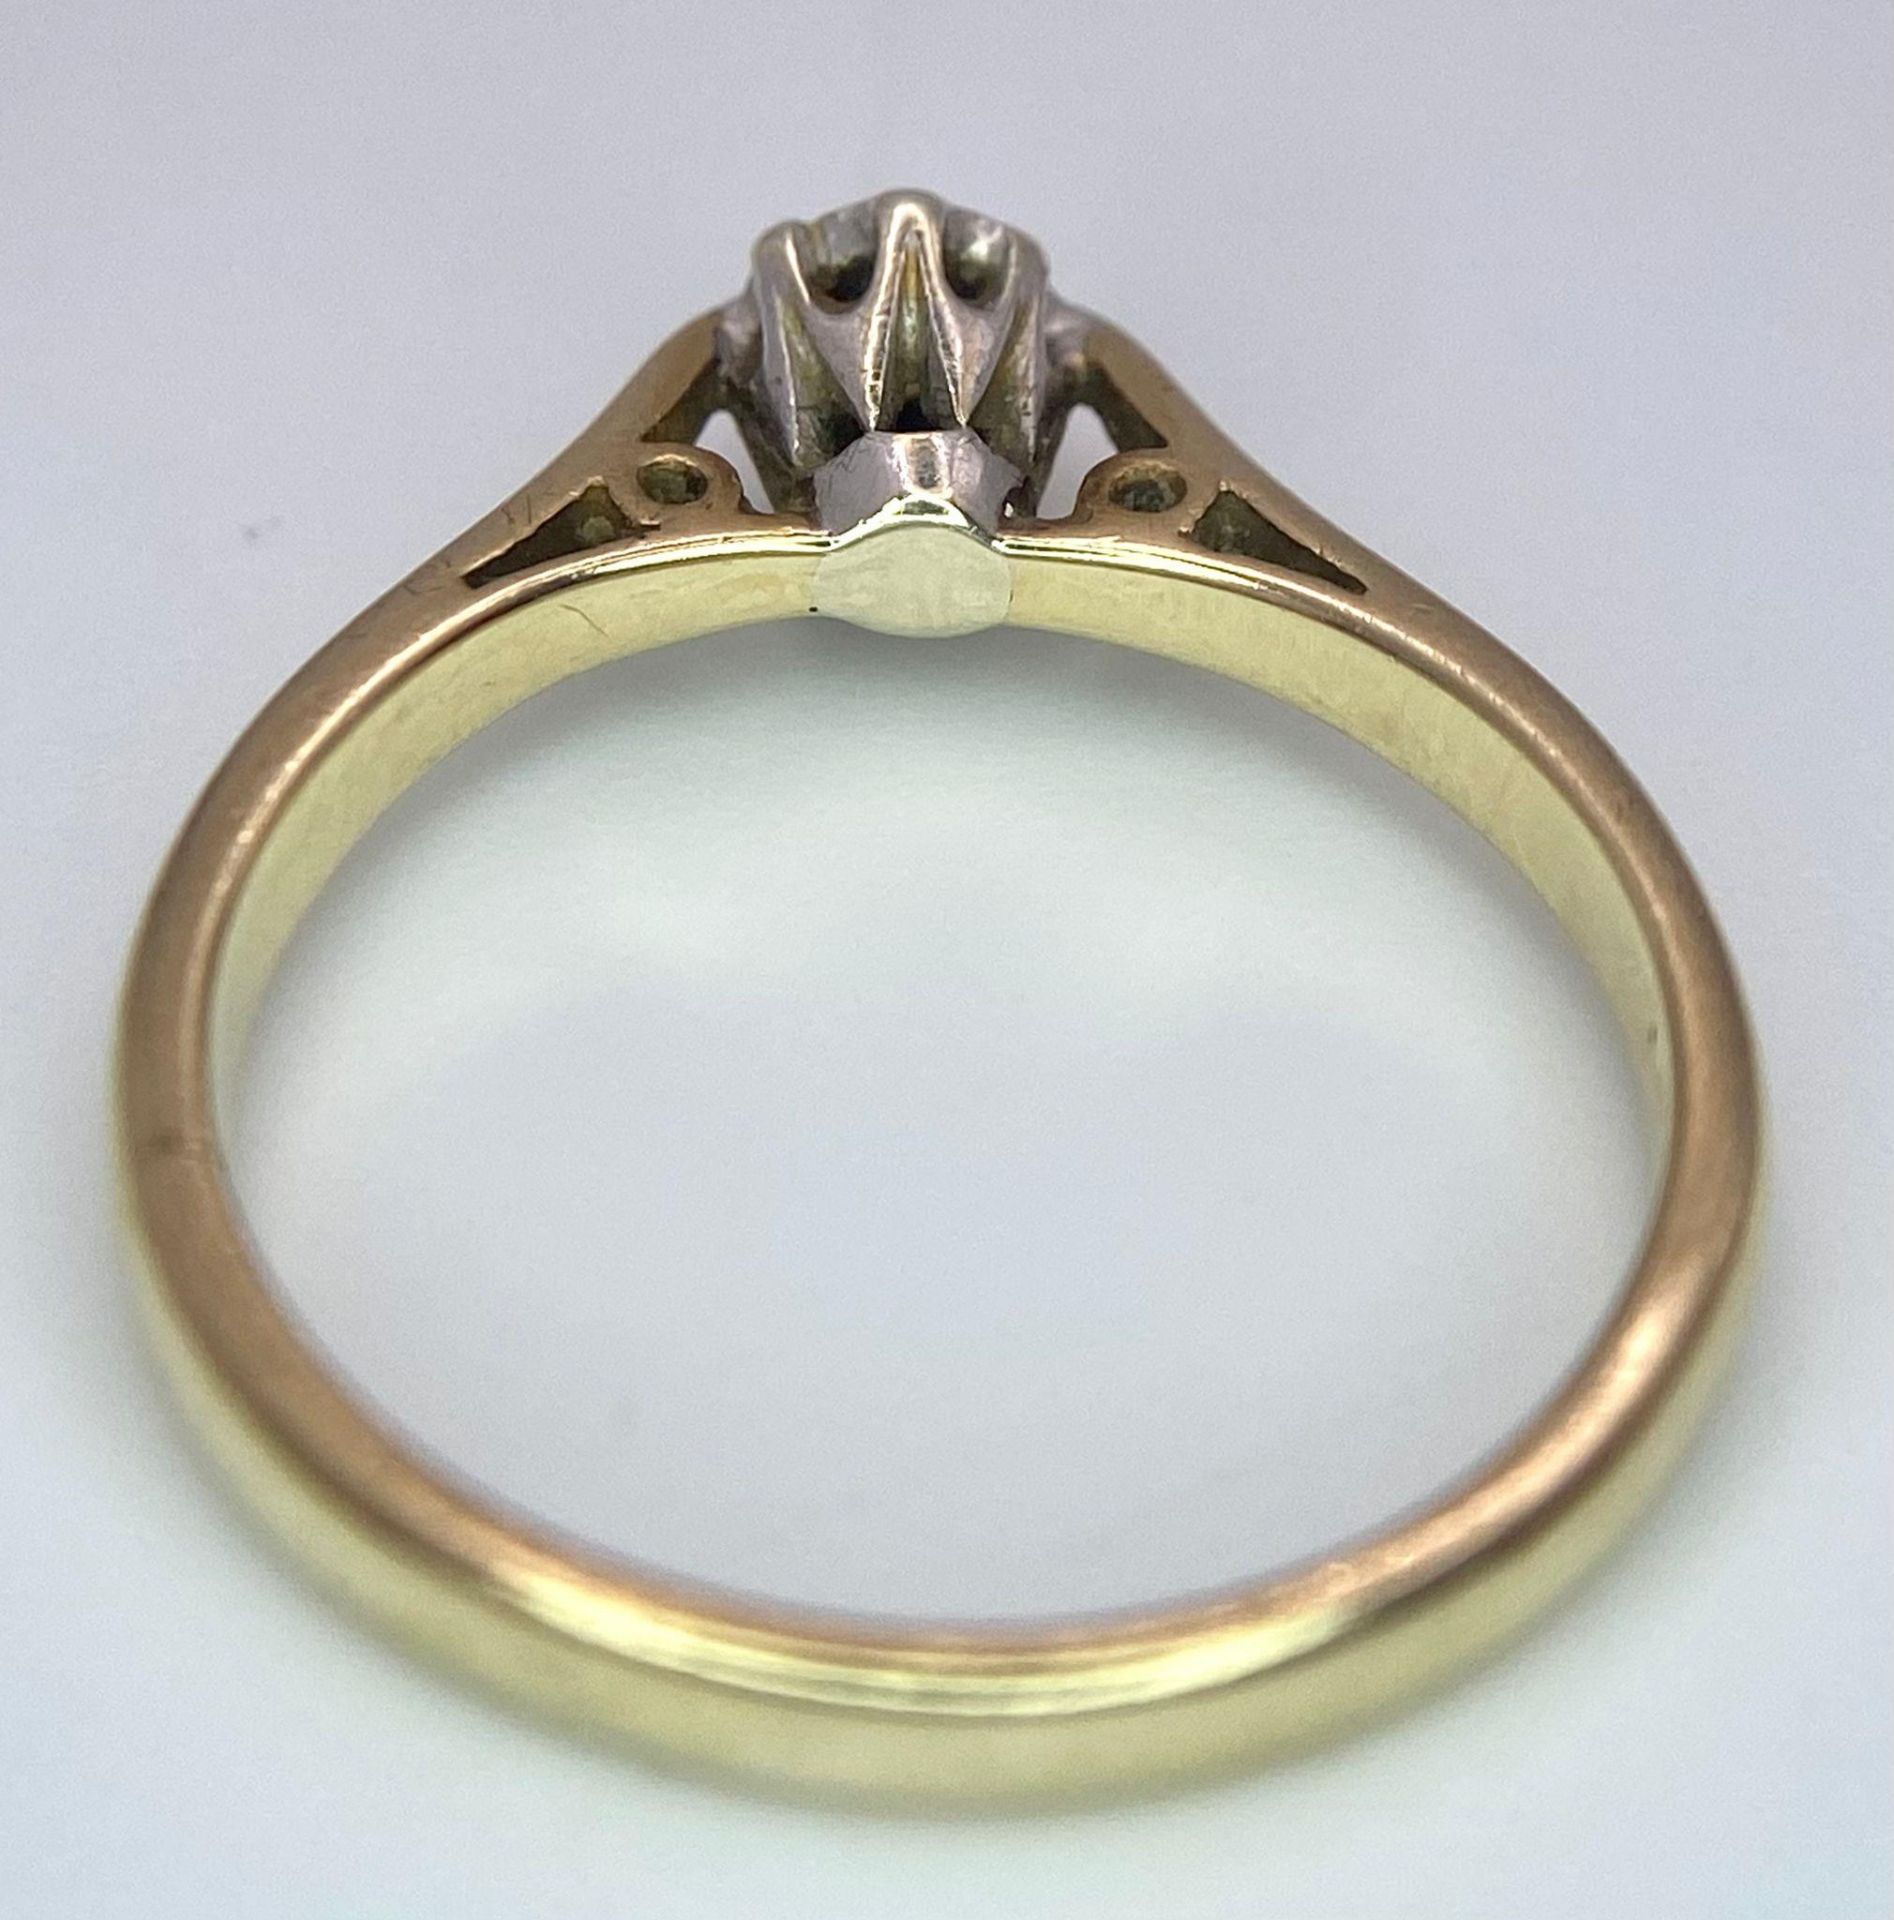 A 9 K yellow gold diamond solitaire ring, size: J1/2, weight: 1.8 g. - Image 5 of 6